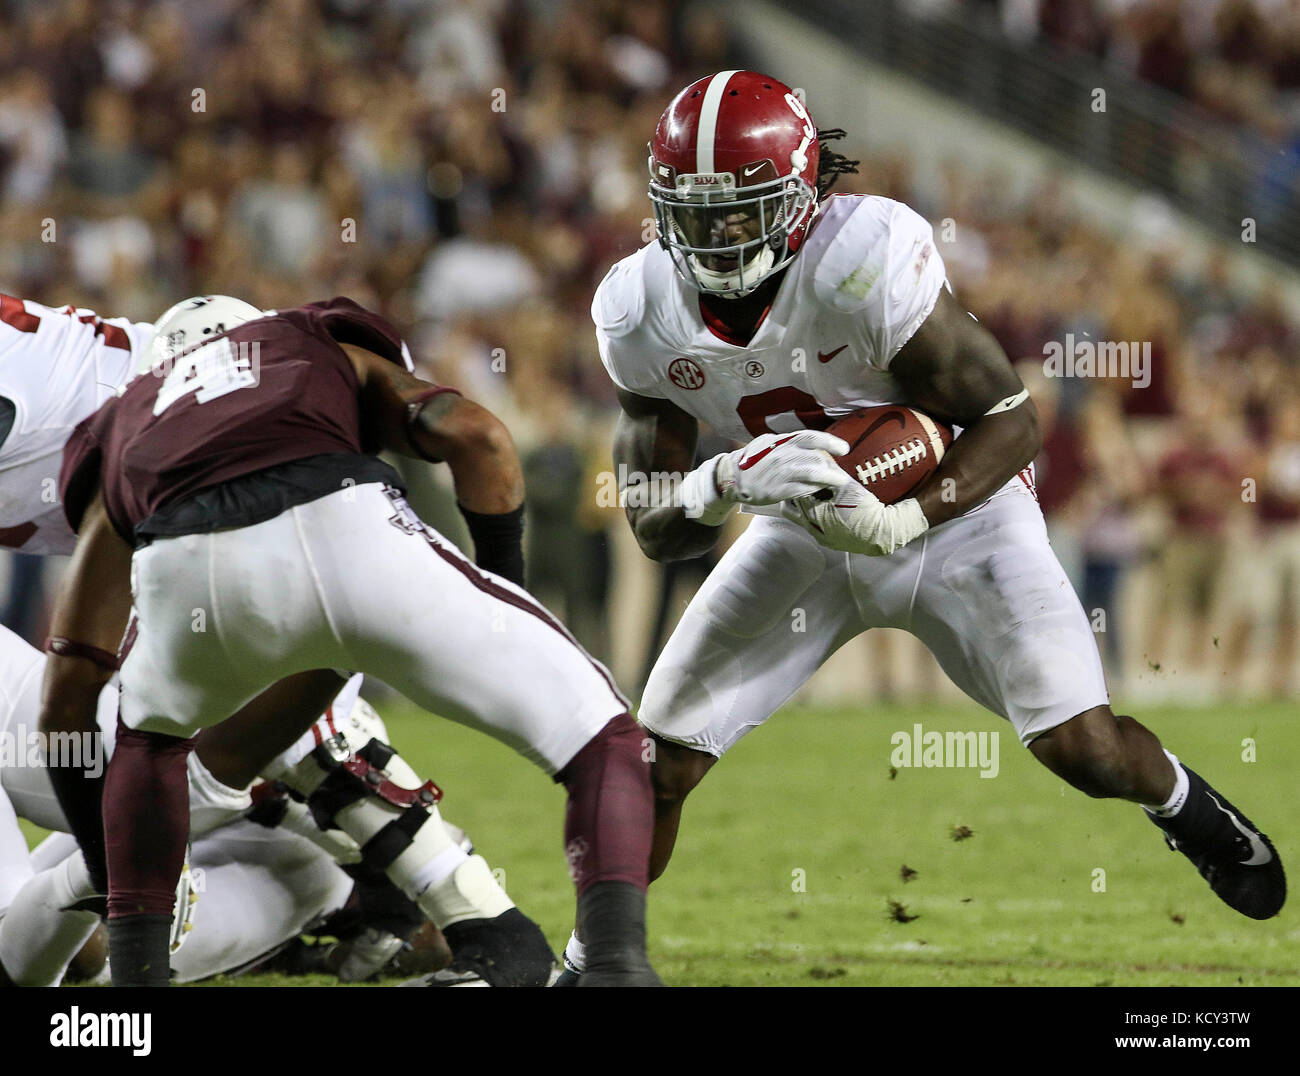 October 6, 2017: Alabama Crimson Tide running back Bo Scarbrough (9) rushes in the third quarter during the NCAA football game between the Alabama Crimson Tide and the Texas A&M Aggies at Kyle Field in College Station, TX; John Glaser/CSM. Stock Photo